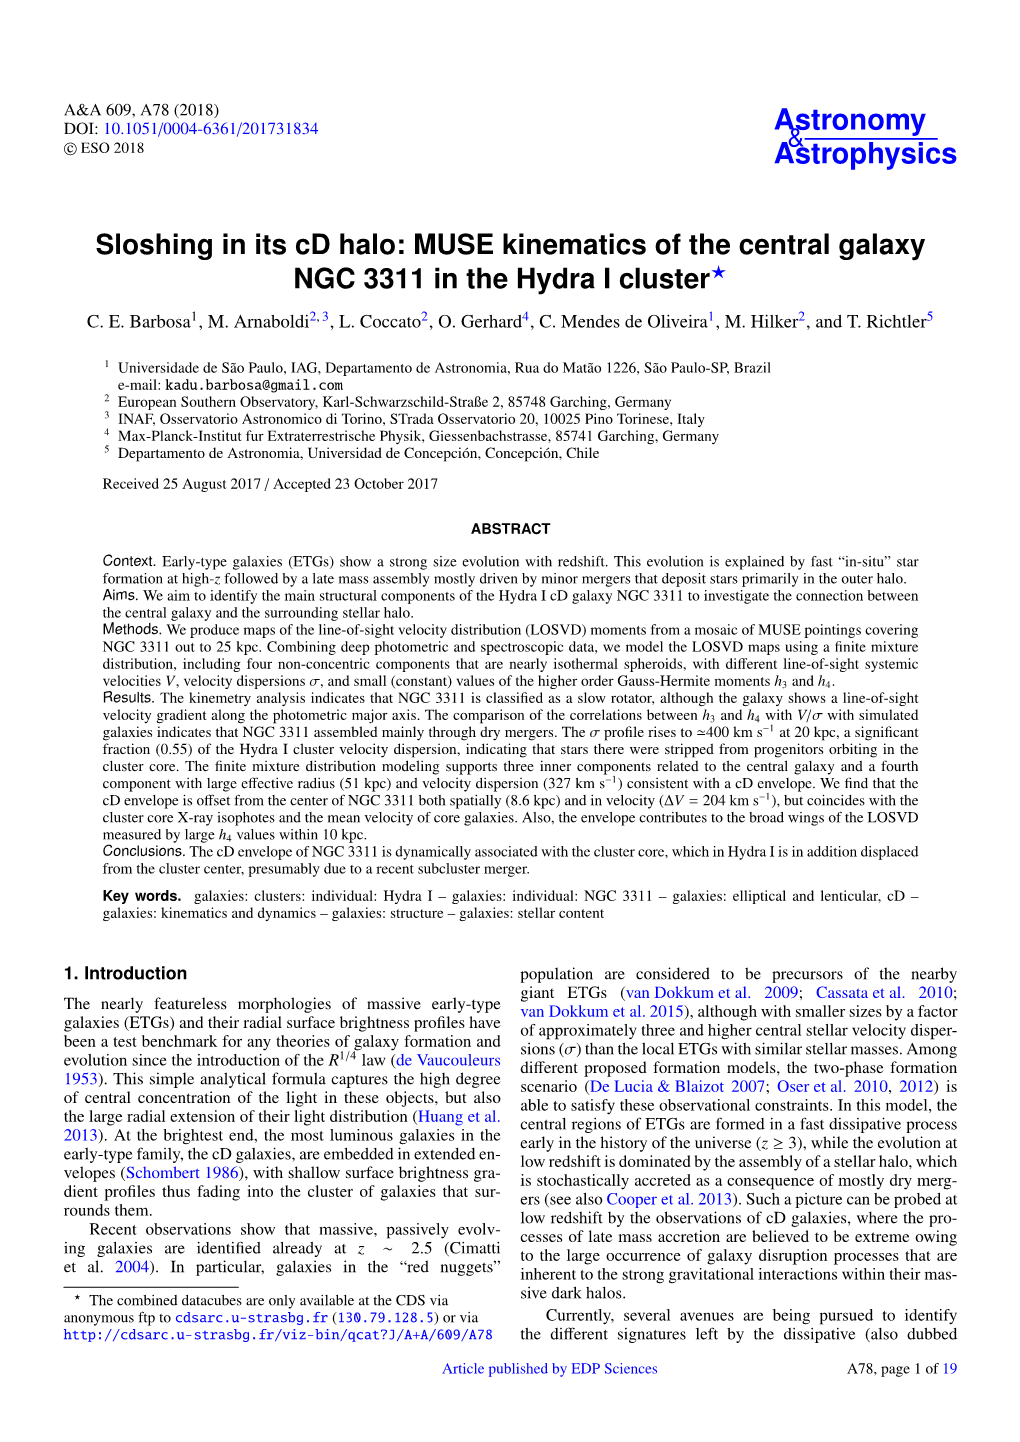 MUSE Kinematics of the Central Galaxy NGC 3311 in the Hydra I Cluster? C